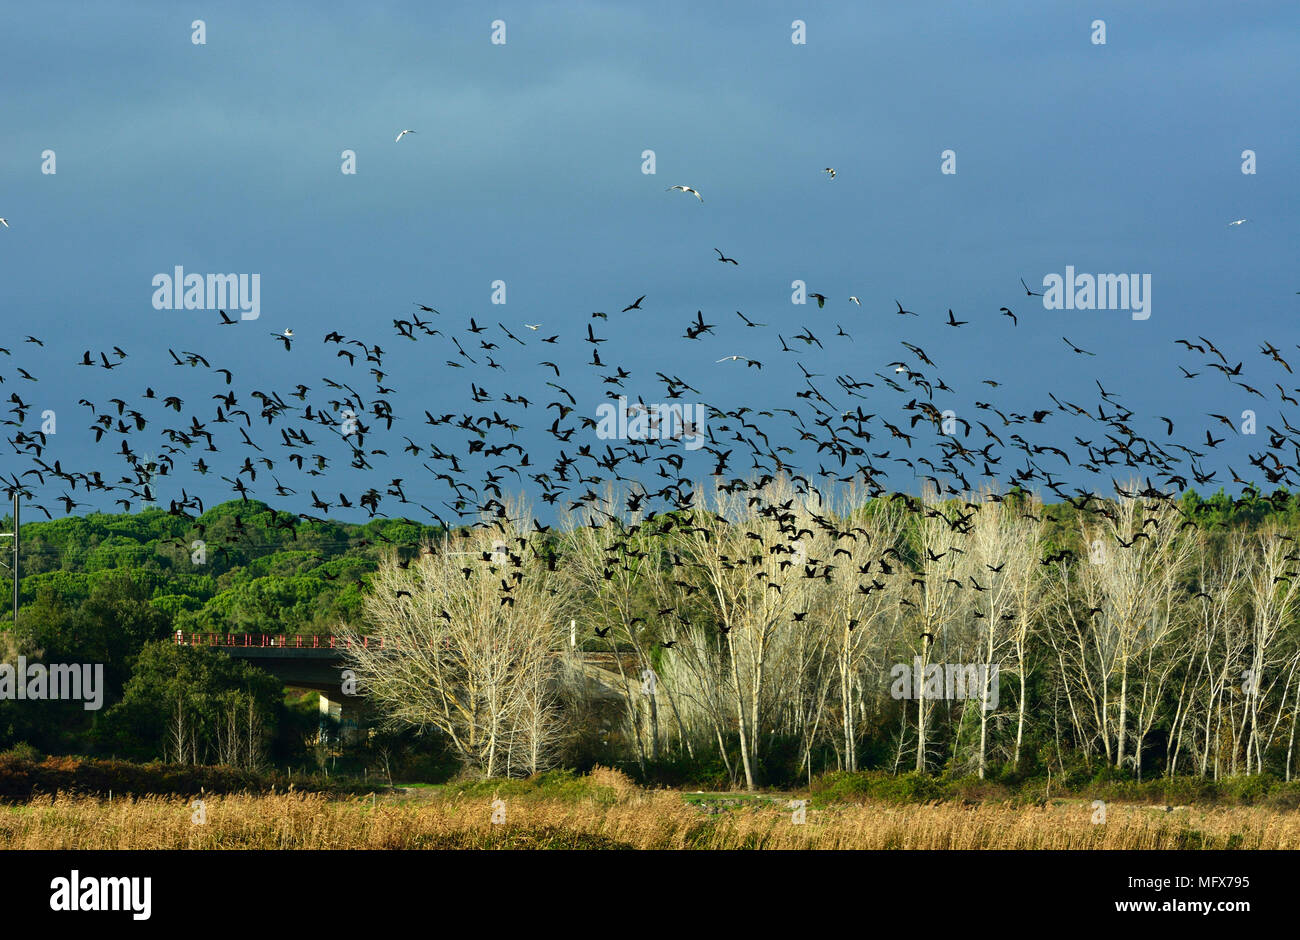 Glossy Ibis flock (Plegadis falcinellus) at the Sado Estuary Nature Reserve, flying over rice fields. Portugal Stock Photo